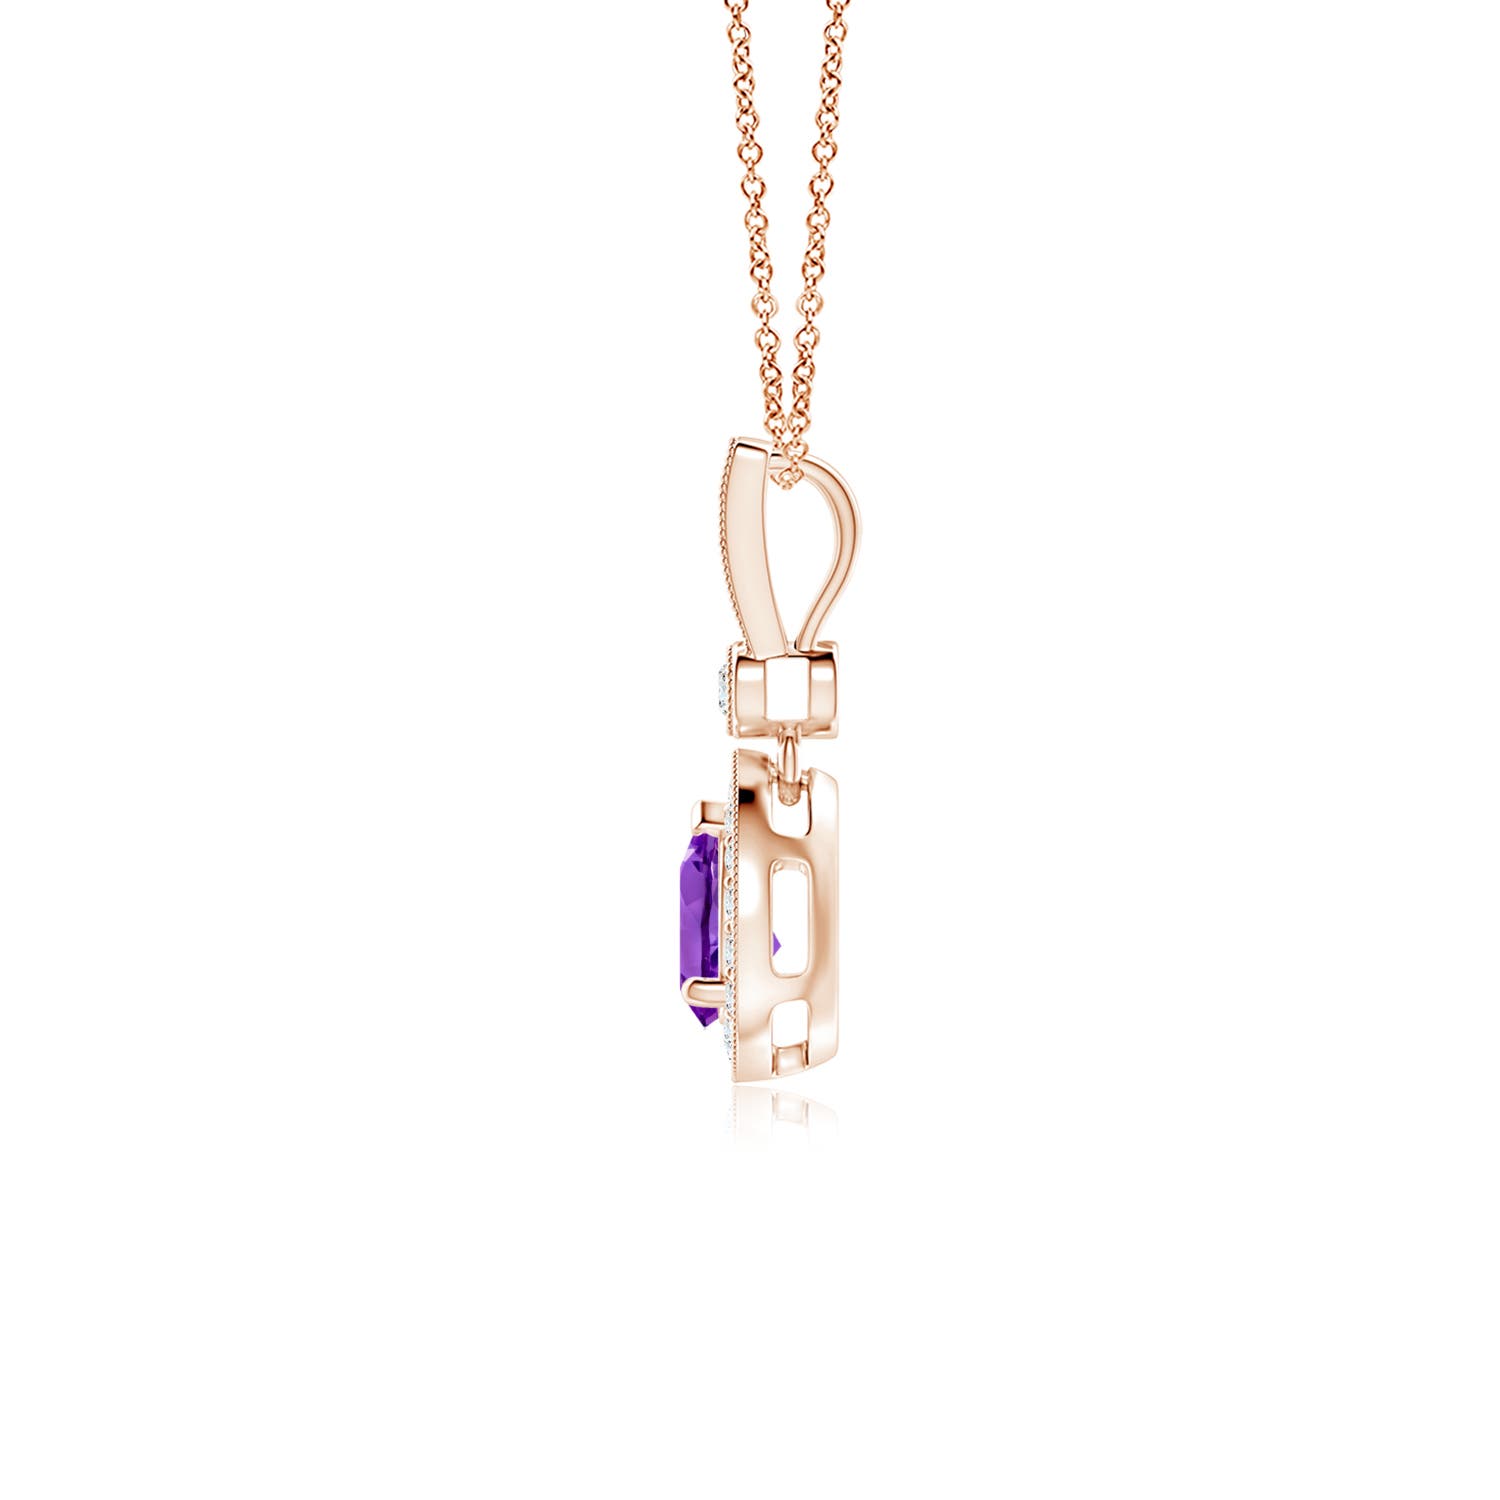 AAA - Amethyst / 0.51 CT / 14 KT Rose Gold